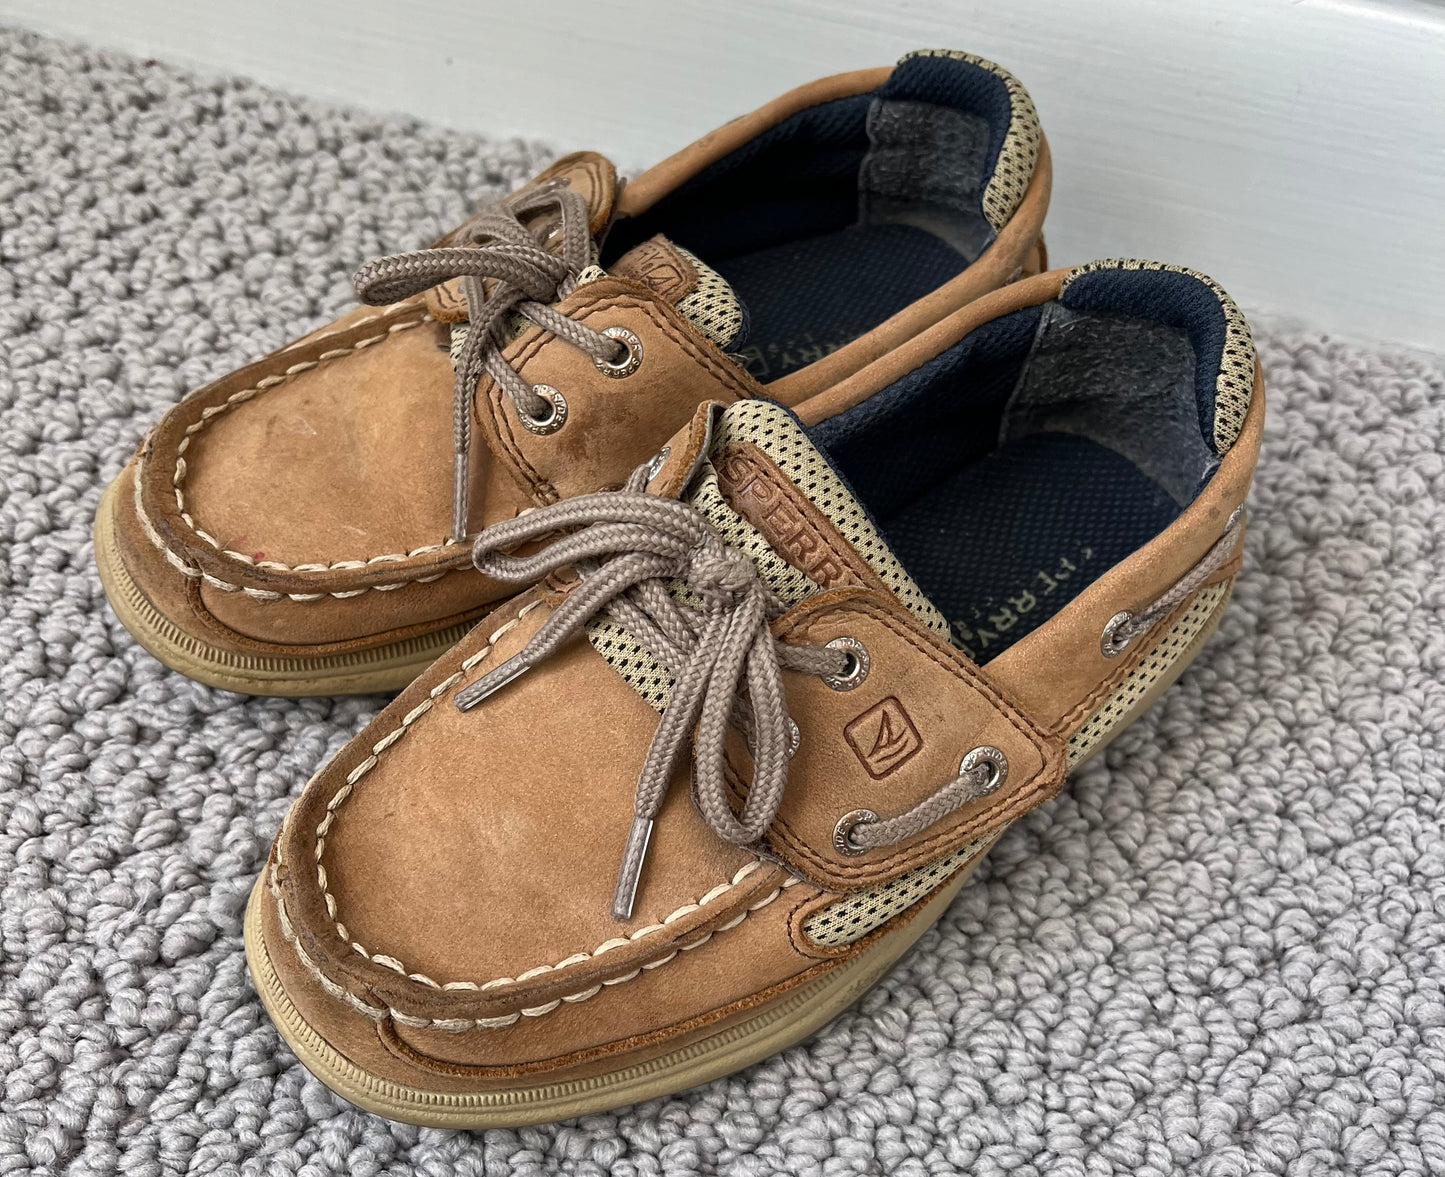 Boys size 11 Sperry Topsider shoes (45244)